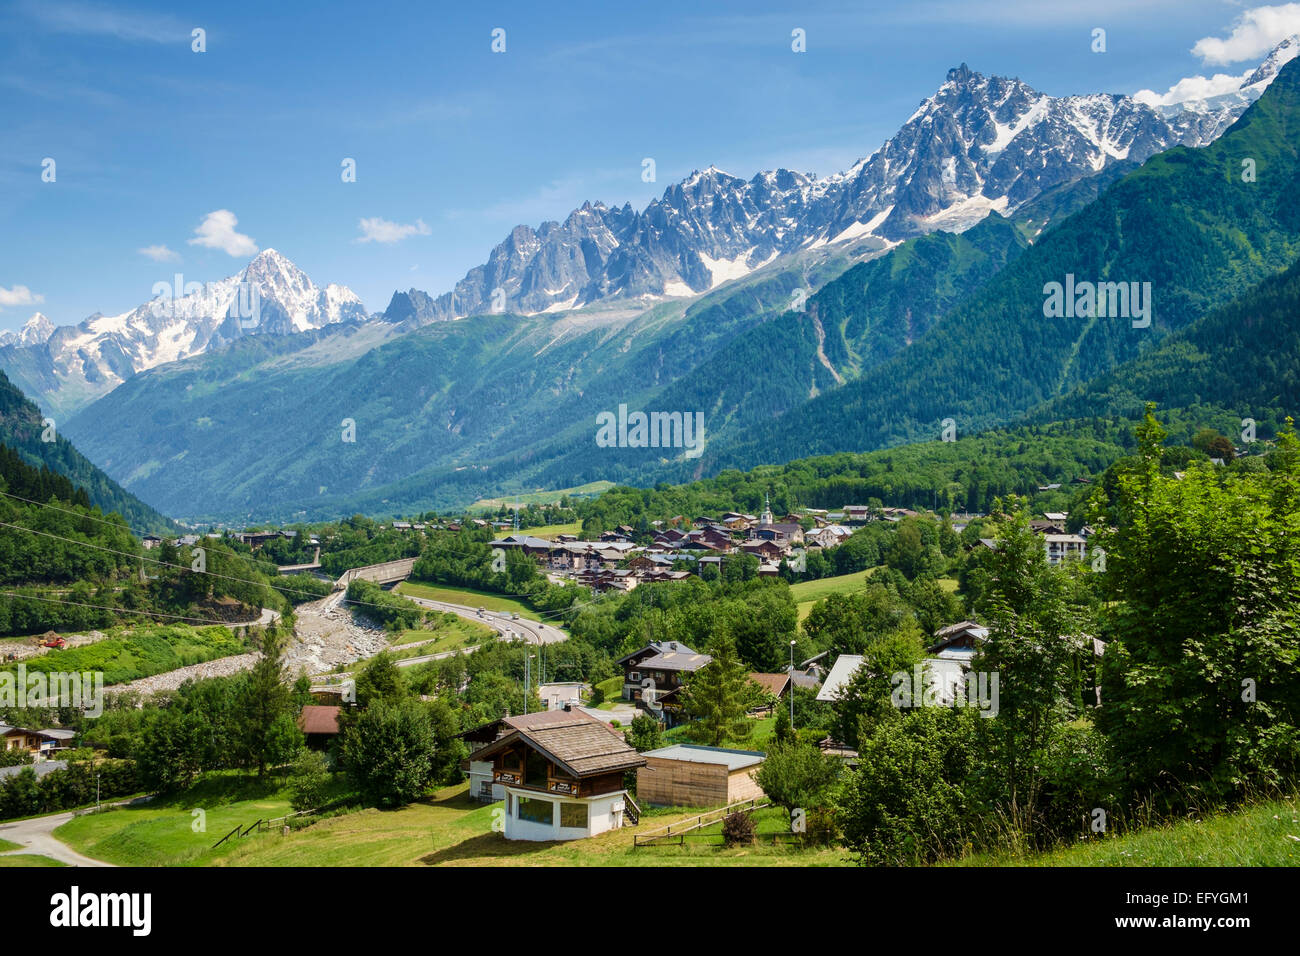 Les Houches village in the Chamonix Valley with the Aiguilles de Chamonix range behind, near Chamonix, Savoy, France, Europe Stock Photo